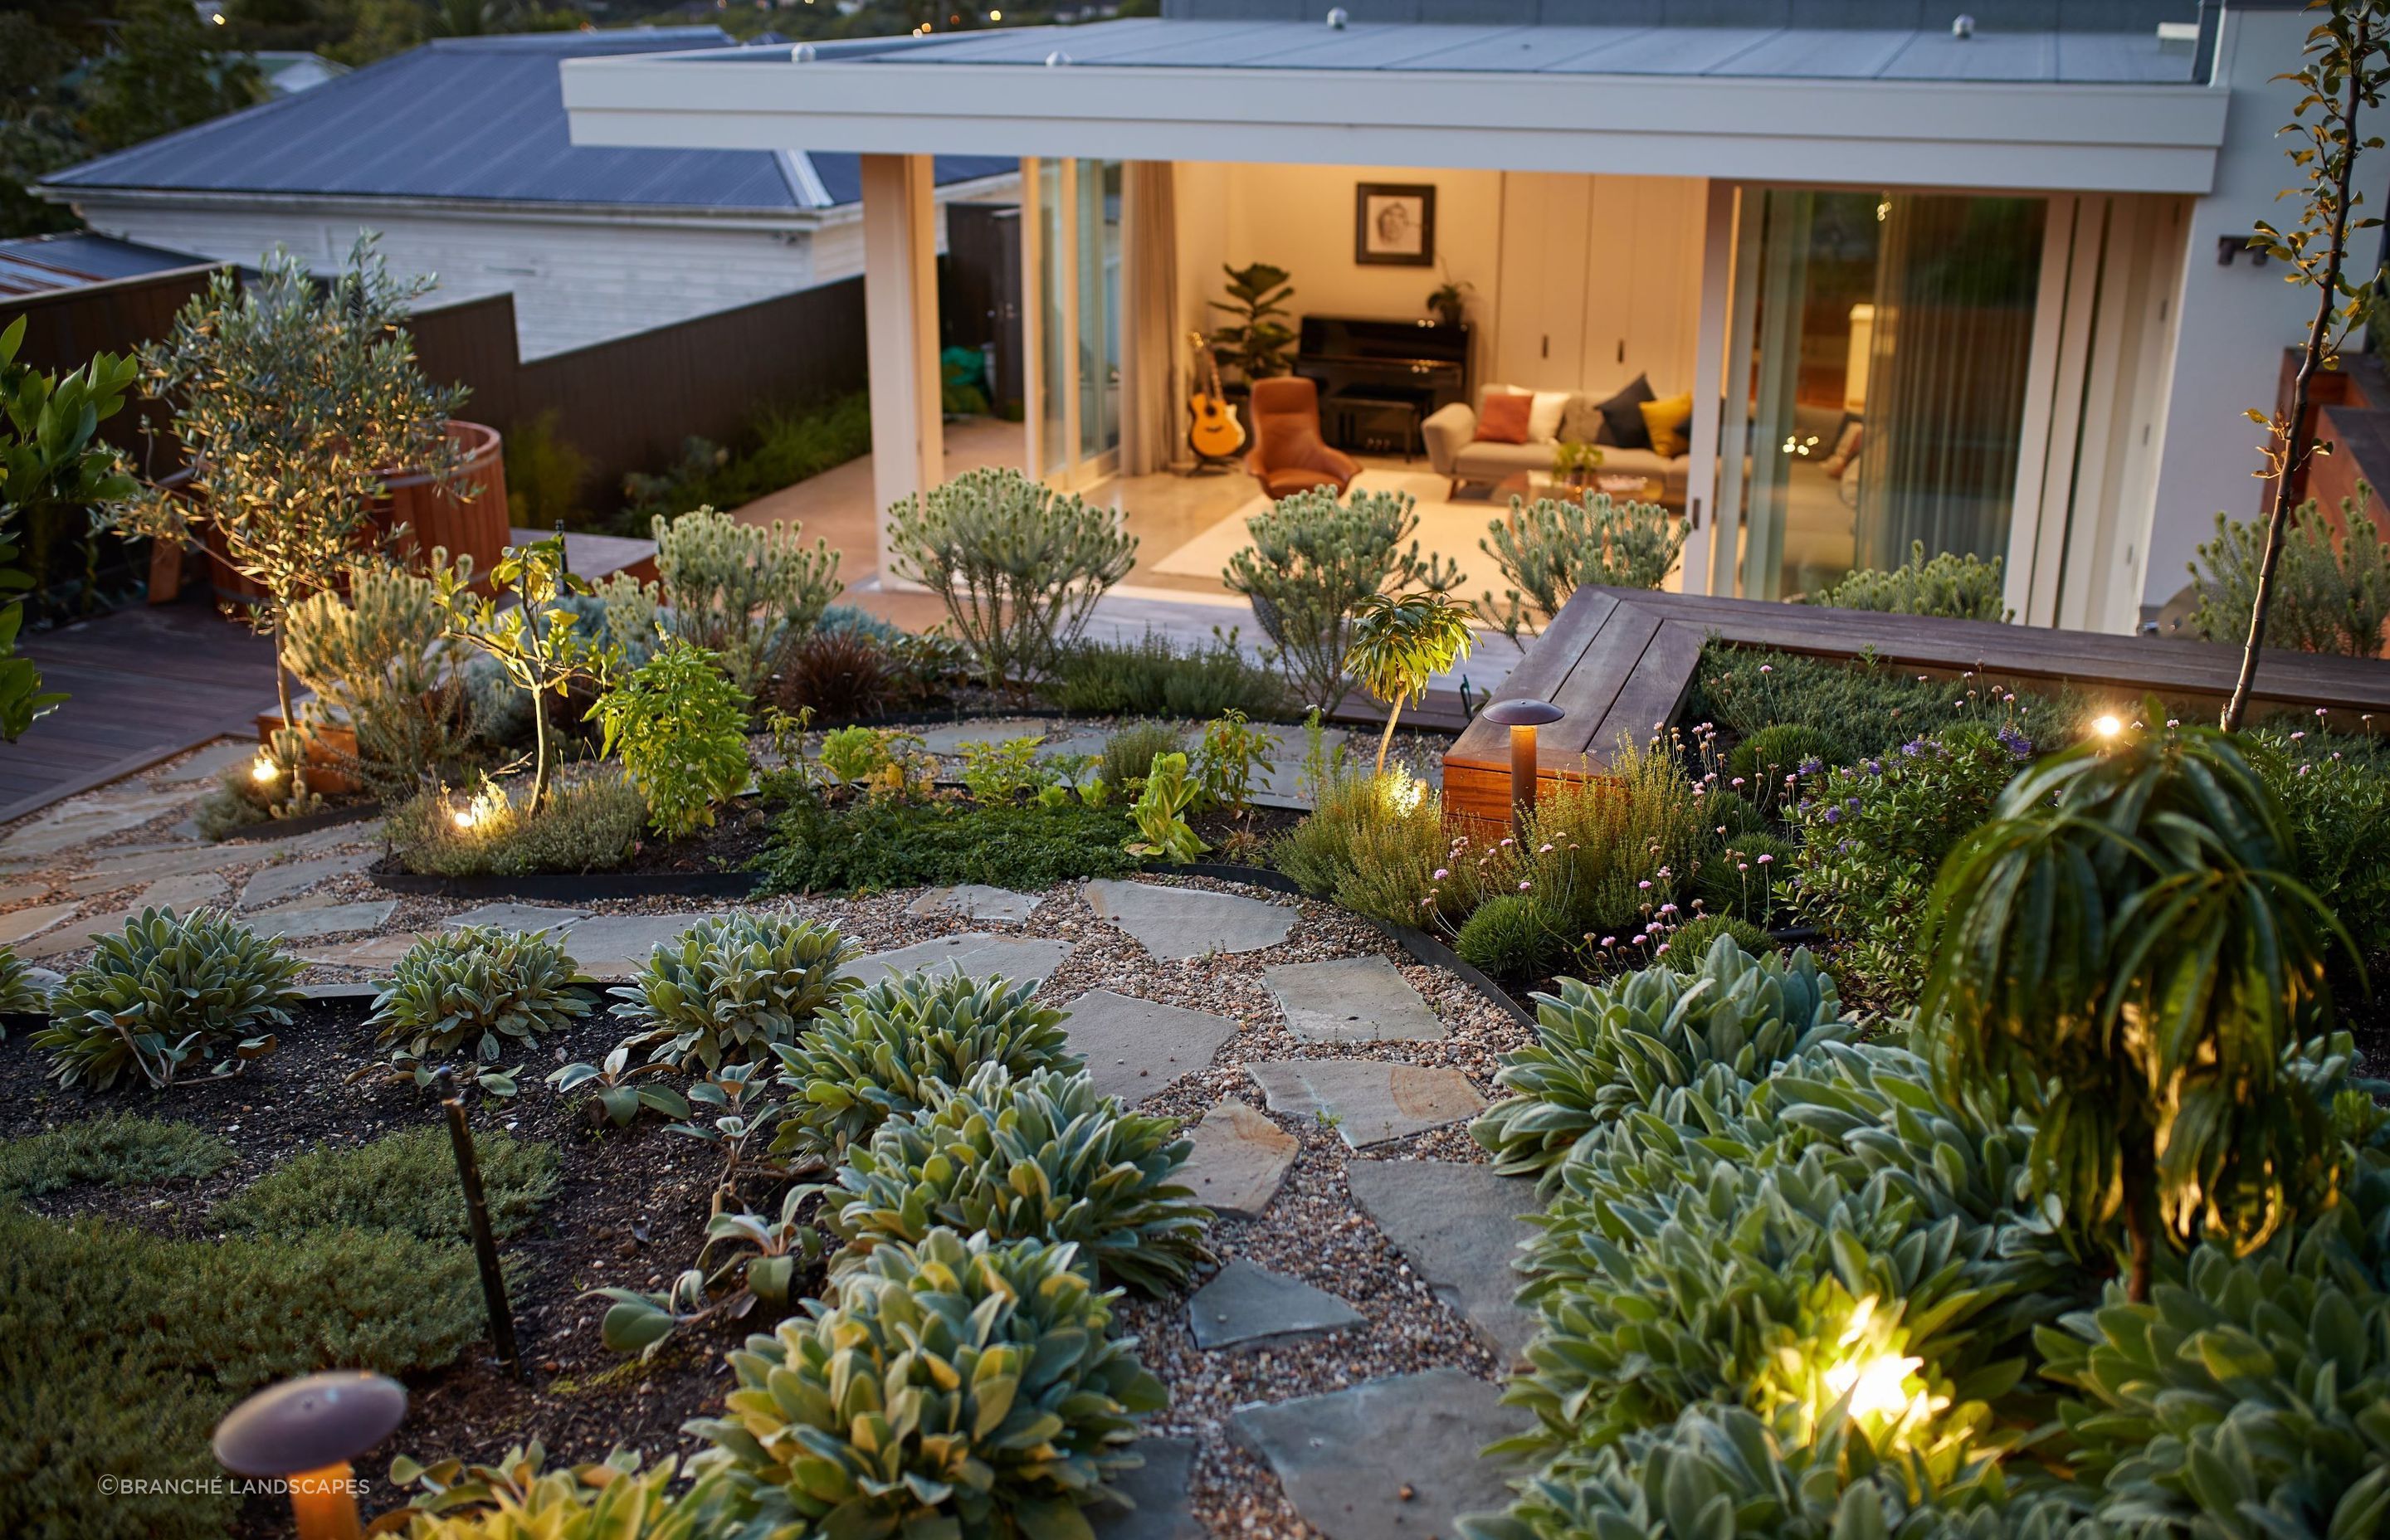 A holistic approach to hardscaping, complemented by a lush garden design like this in Kingsland, will elevate your outdoor space immeasurably.